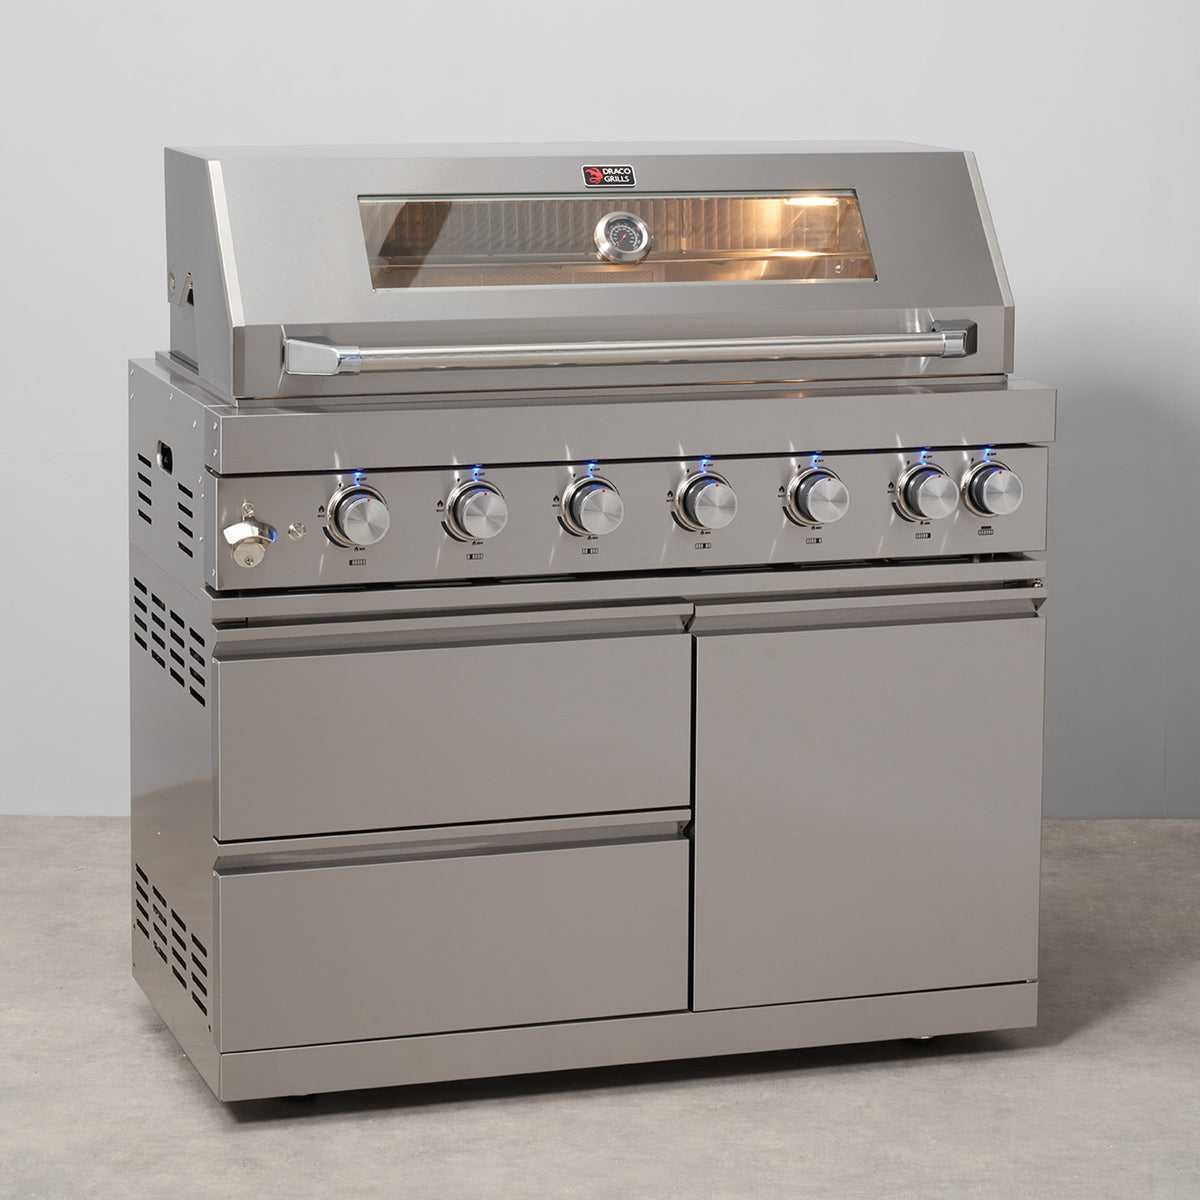 Draco Grills 6 Burner BBQ Modular Outdoor Kitchen with Sear Station and Single Fridge Unit